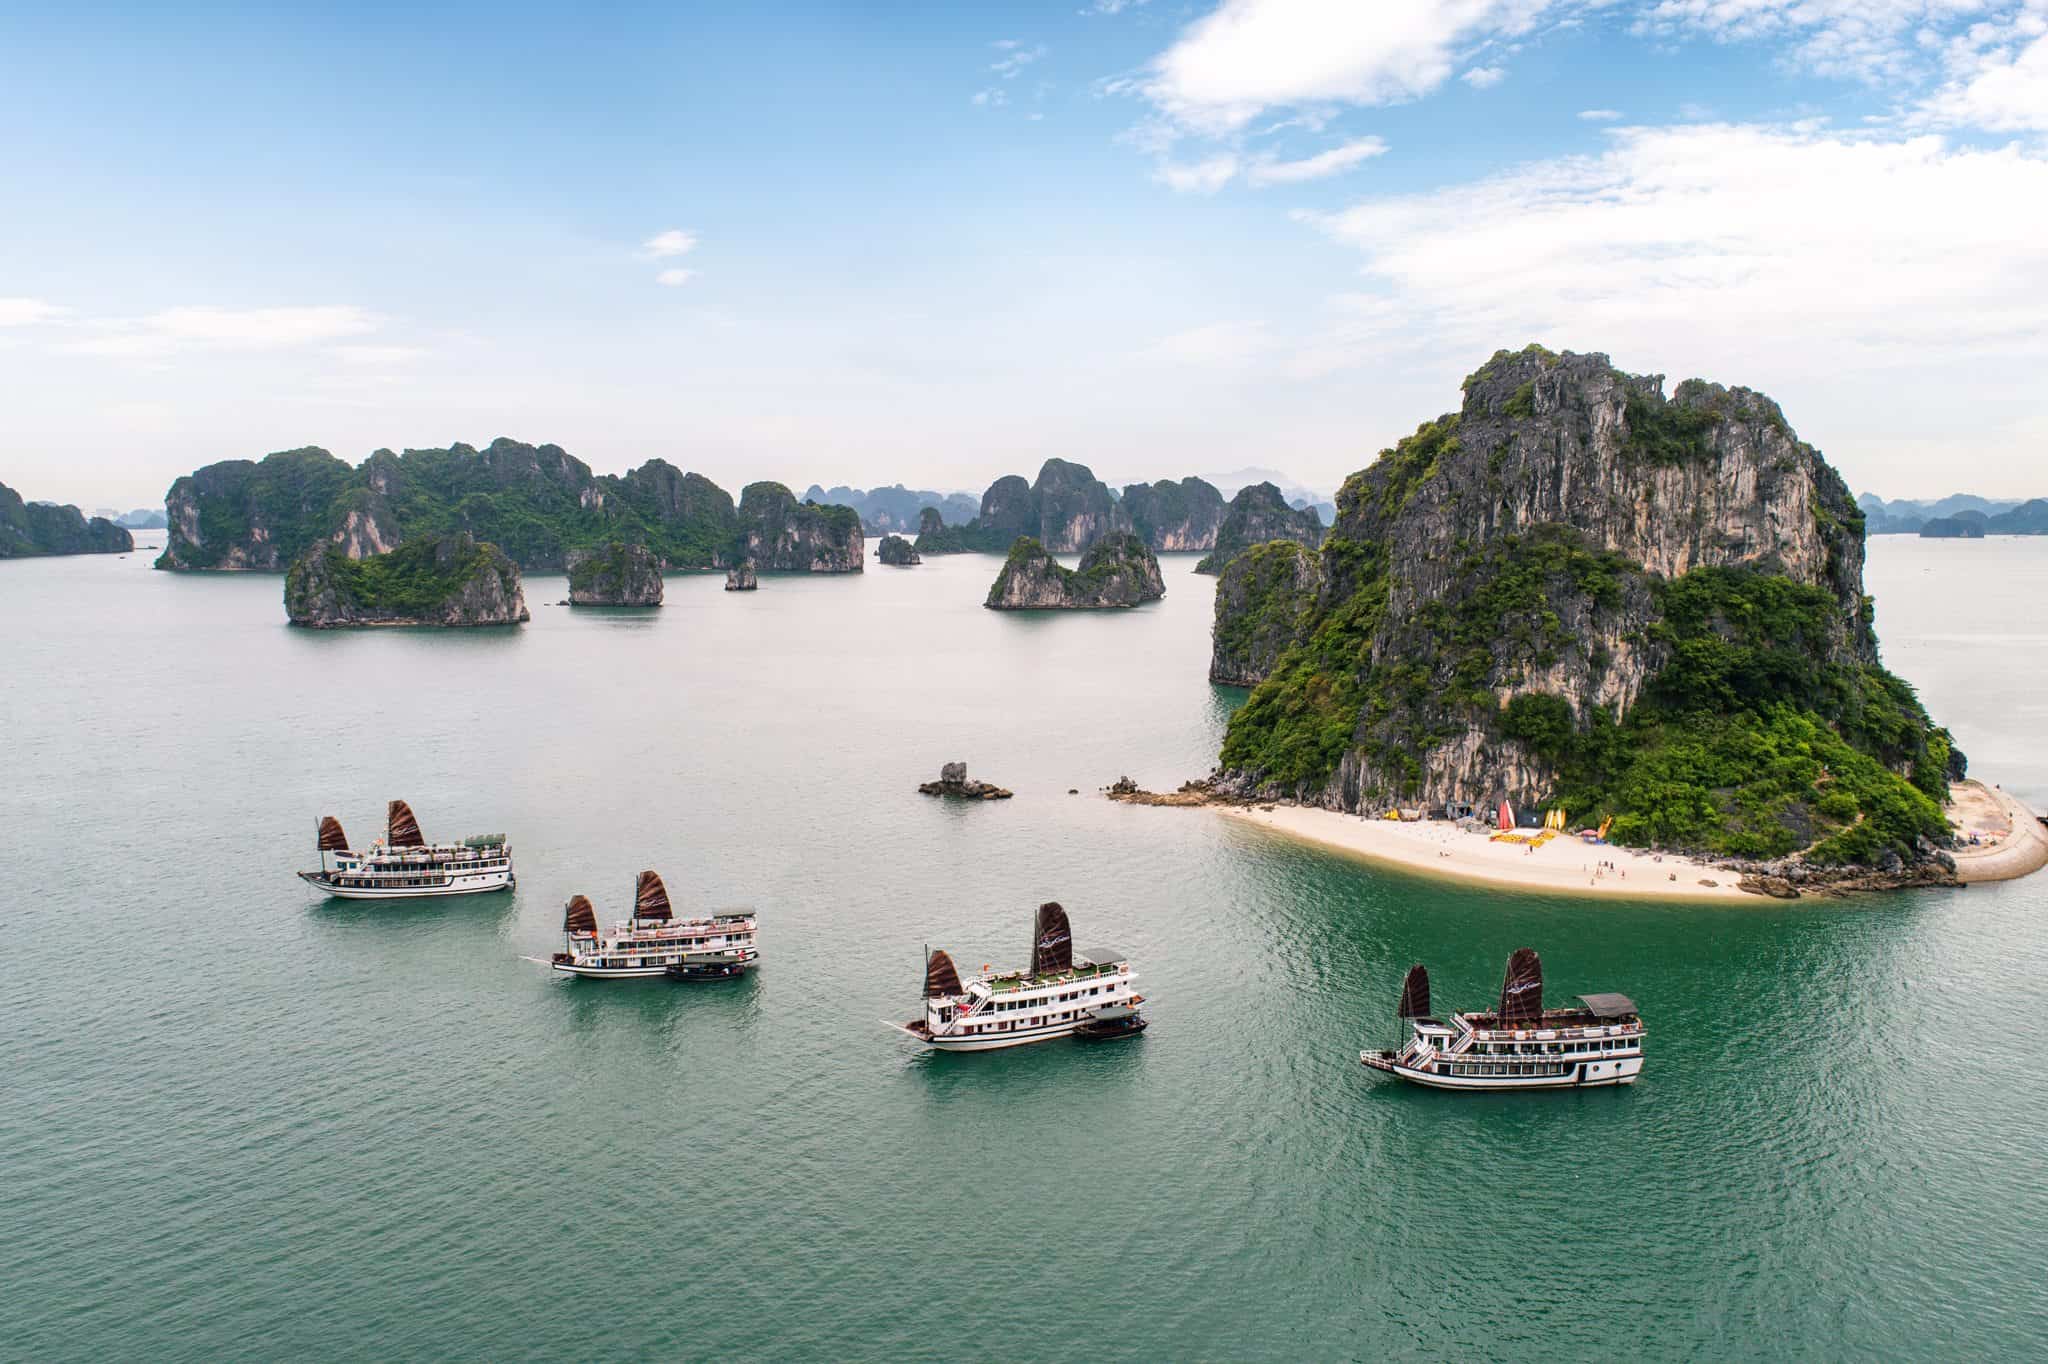 Make the most of your time in Halong Bay and explore all its spectacular weather on offer